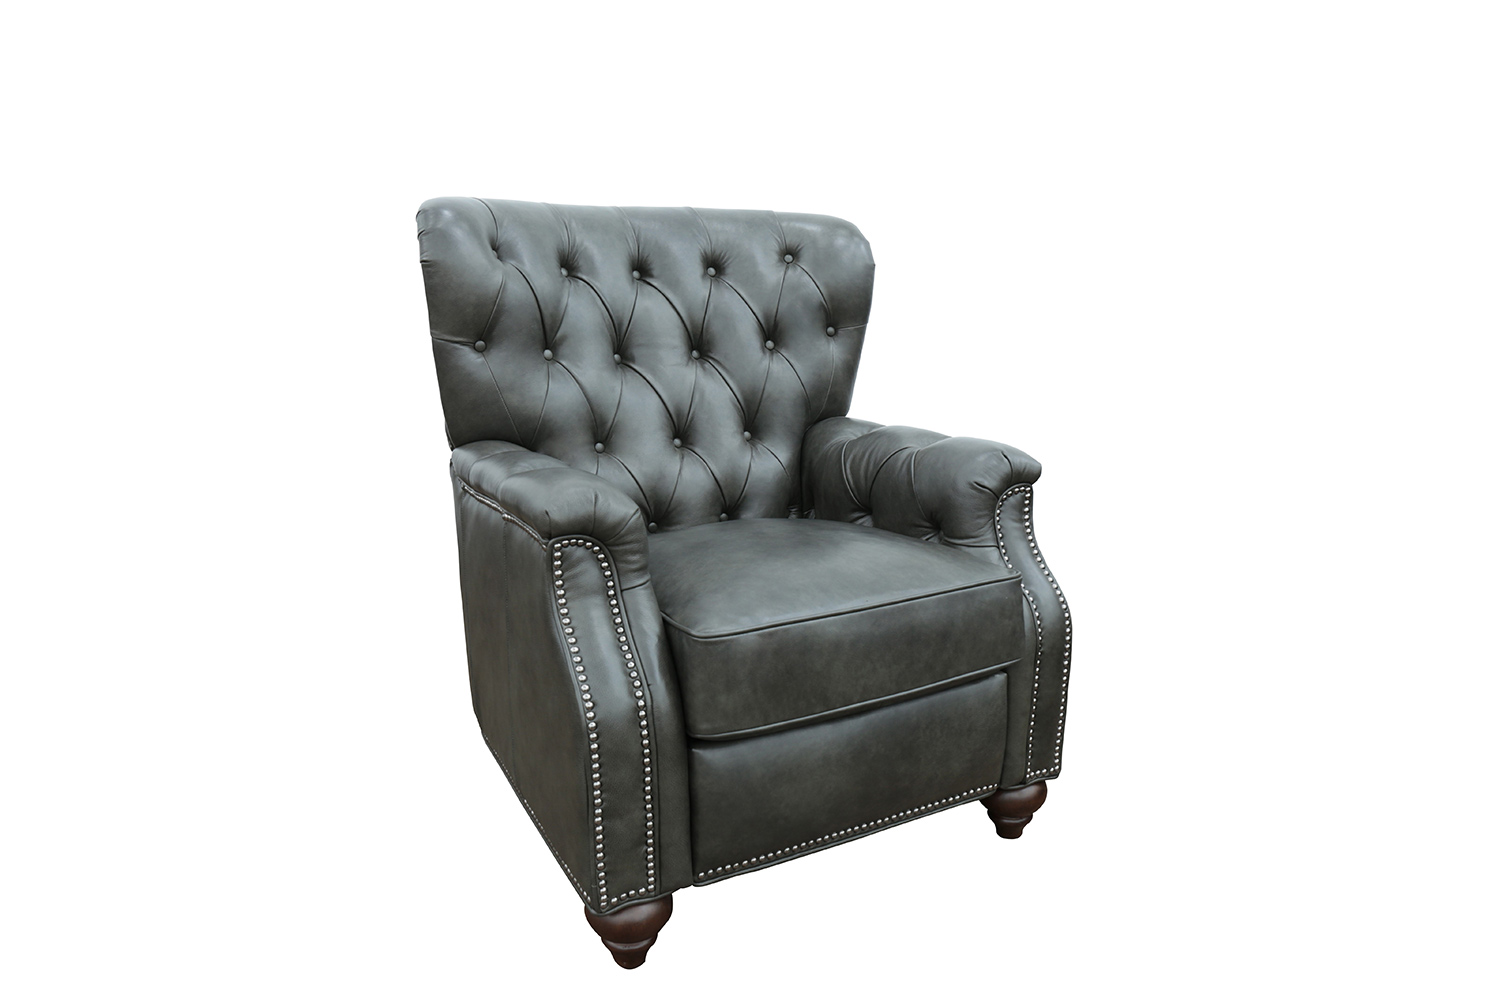 Barcalounger Lombard Recliner Chair - Ashford Graphite/All Leather